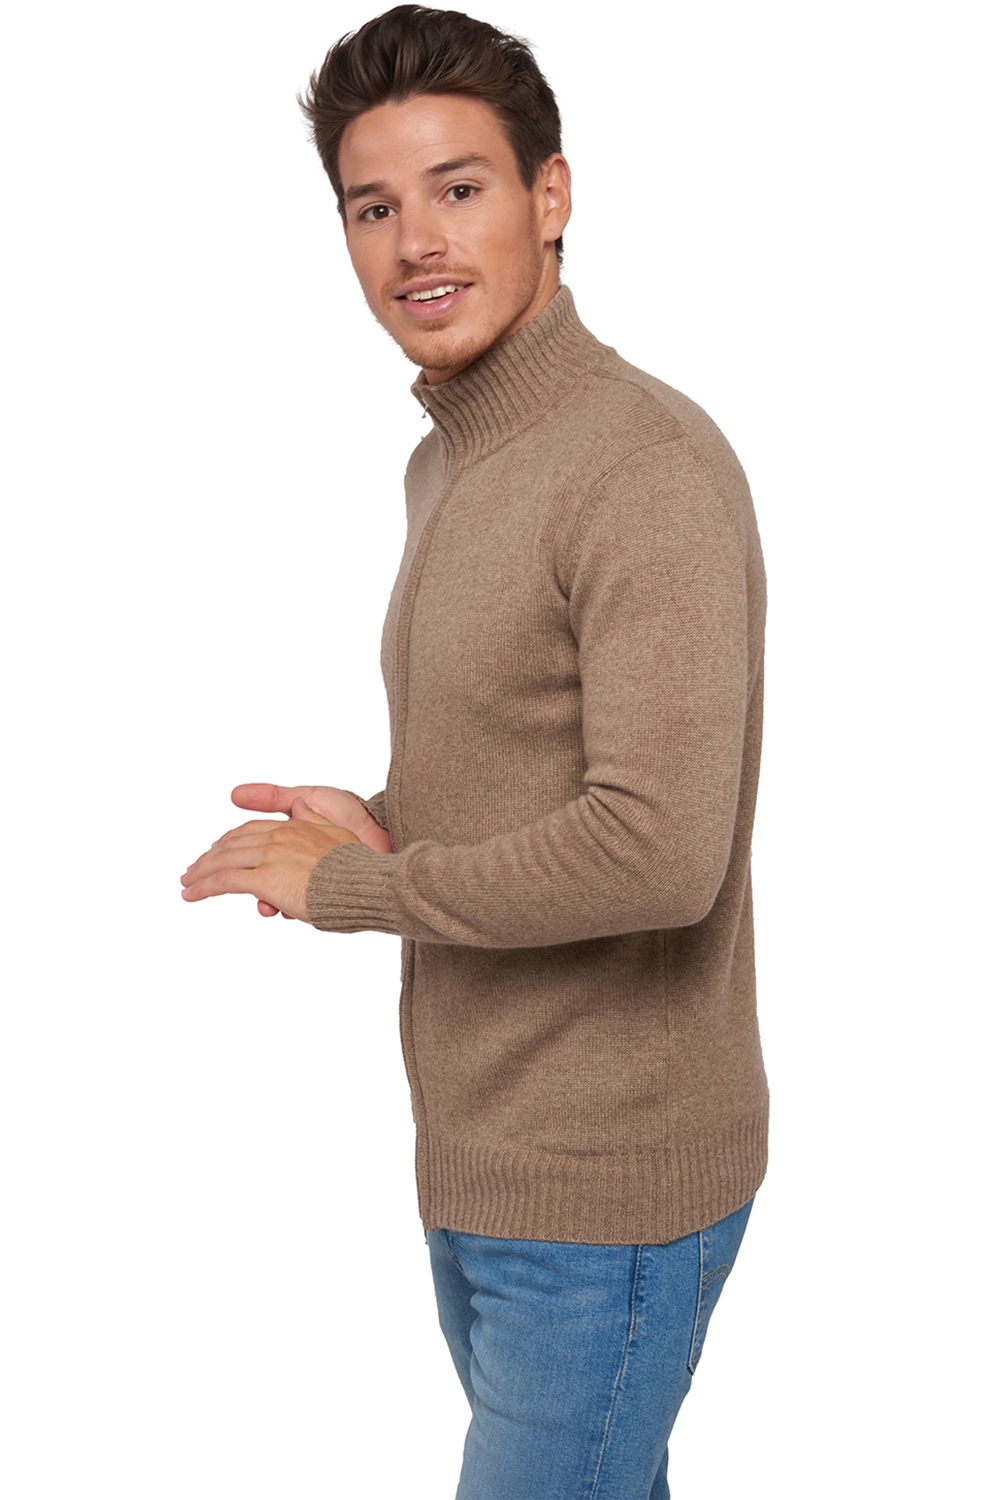 Cachemire pull homme zip capuche maxime natural brown natural beige m